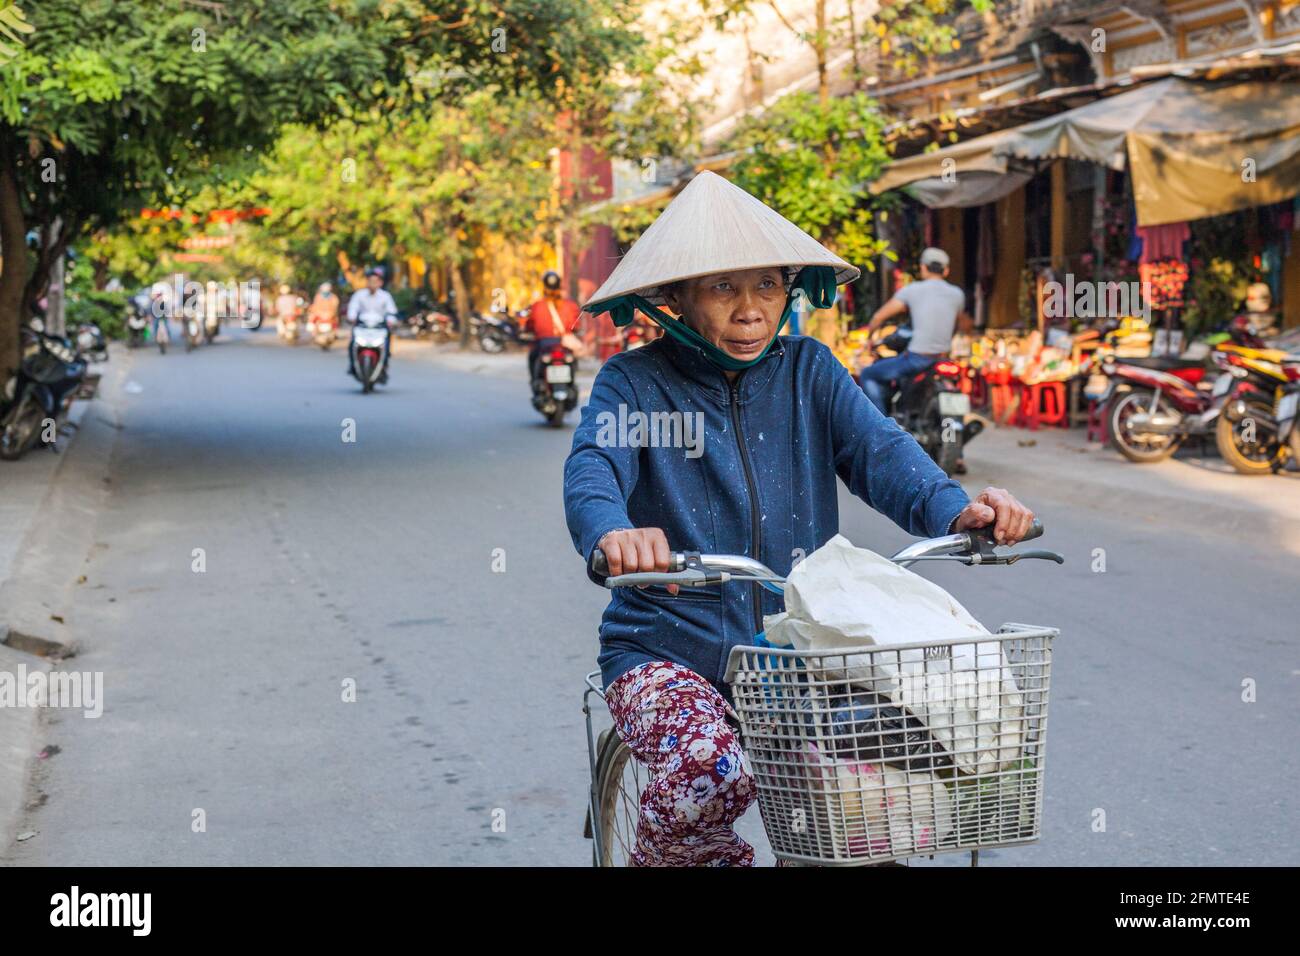 Elderly Vietnamese lady wearing conical hat riding a bicycle, Hoi An, Vietnam Stock Photo